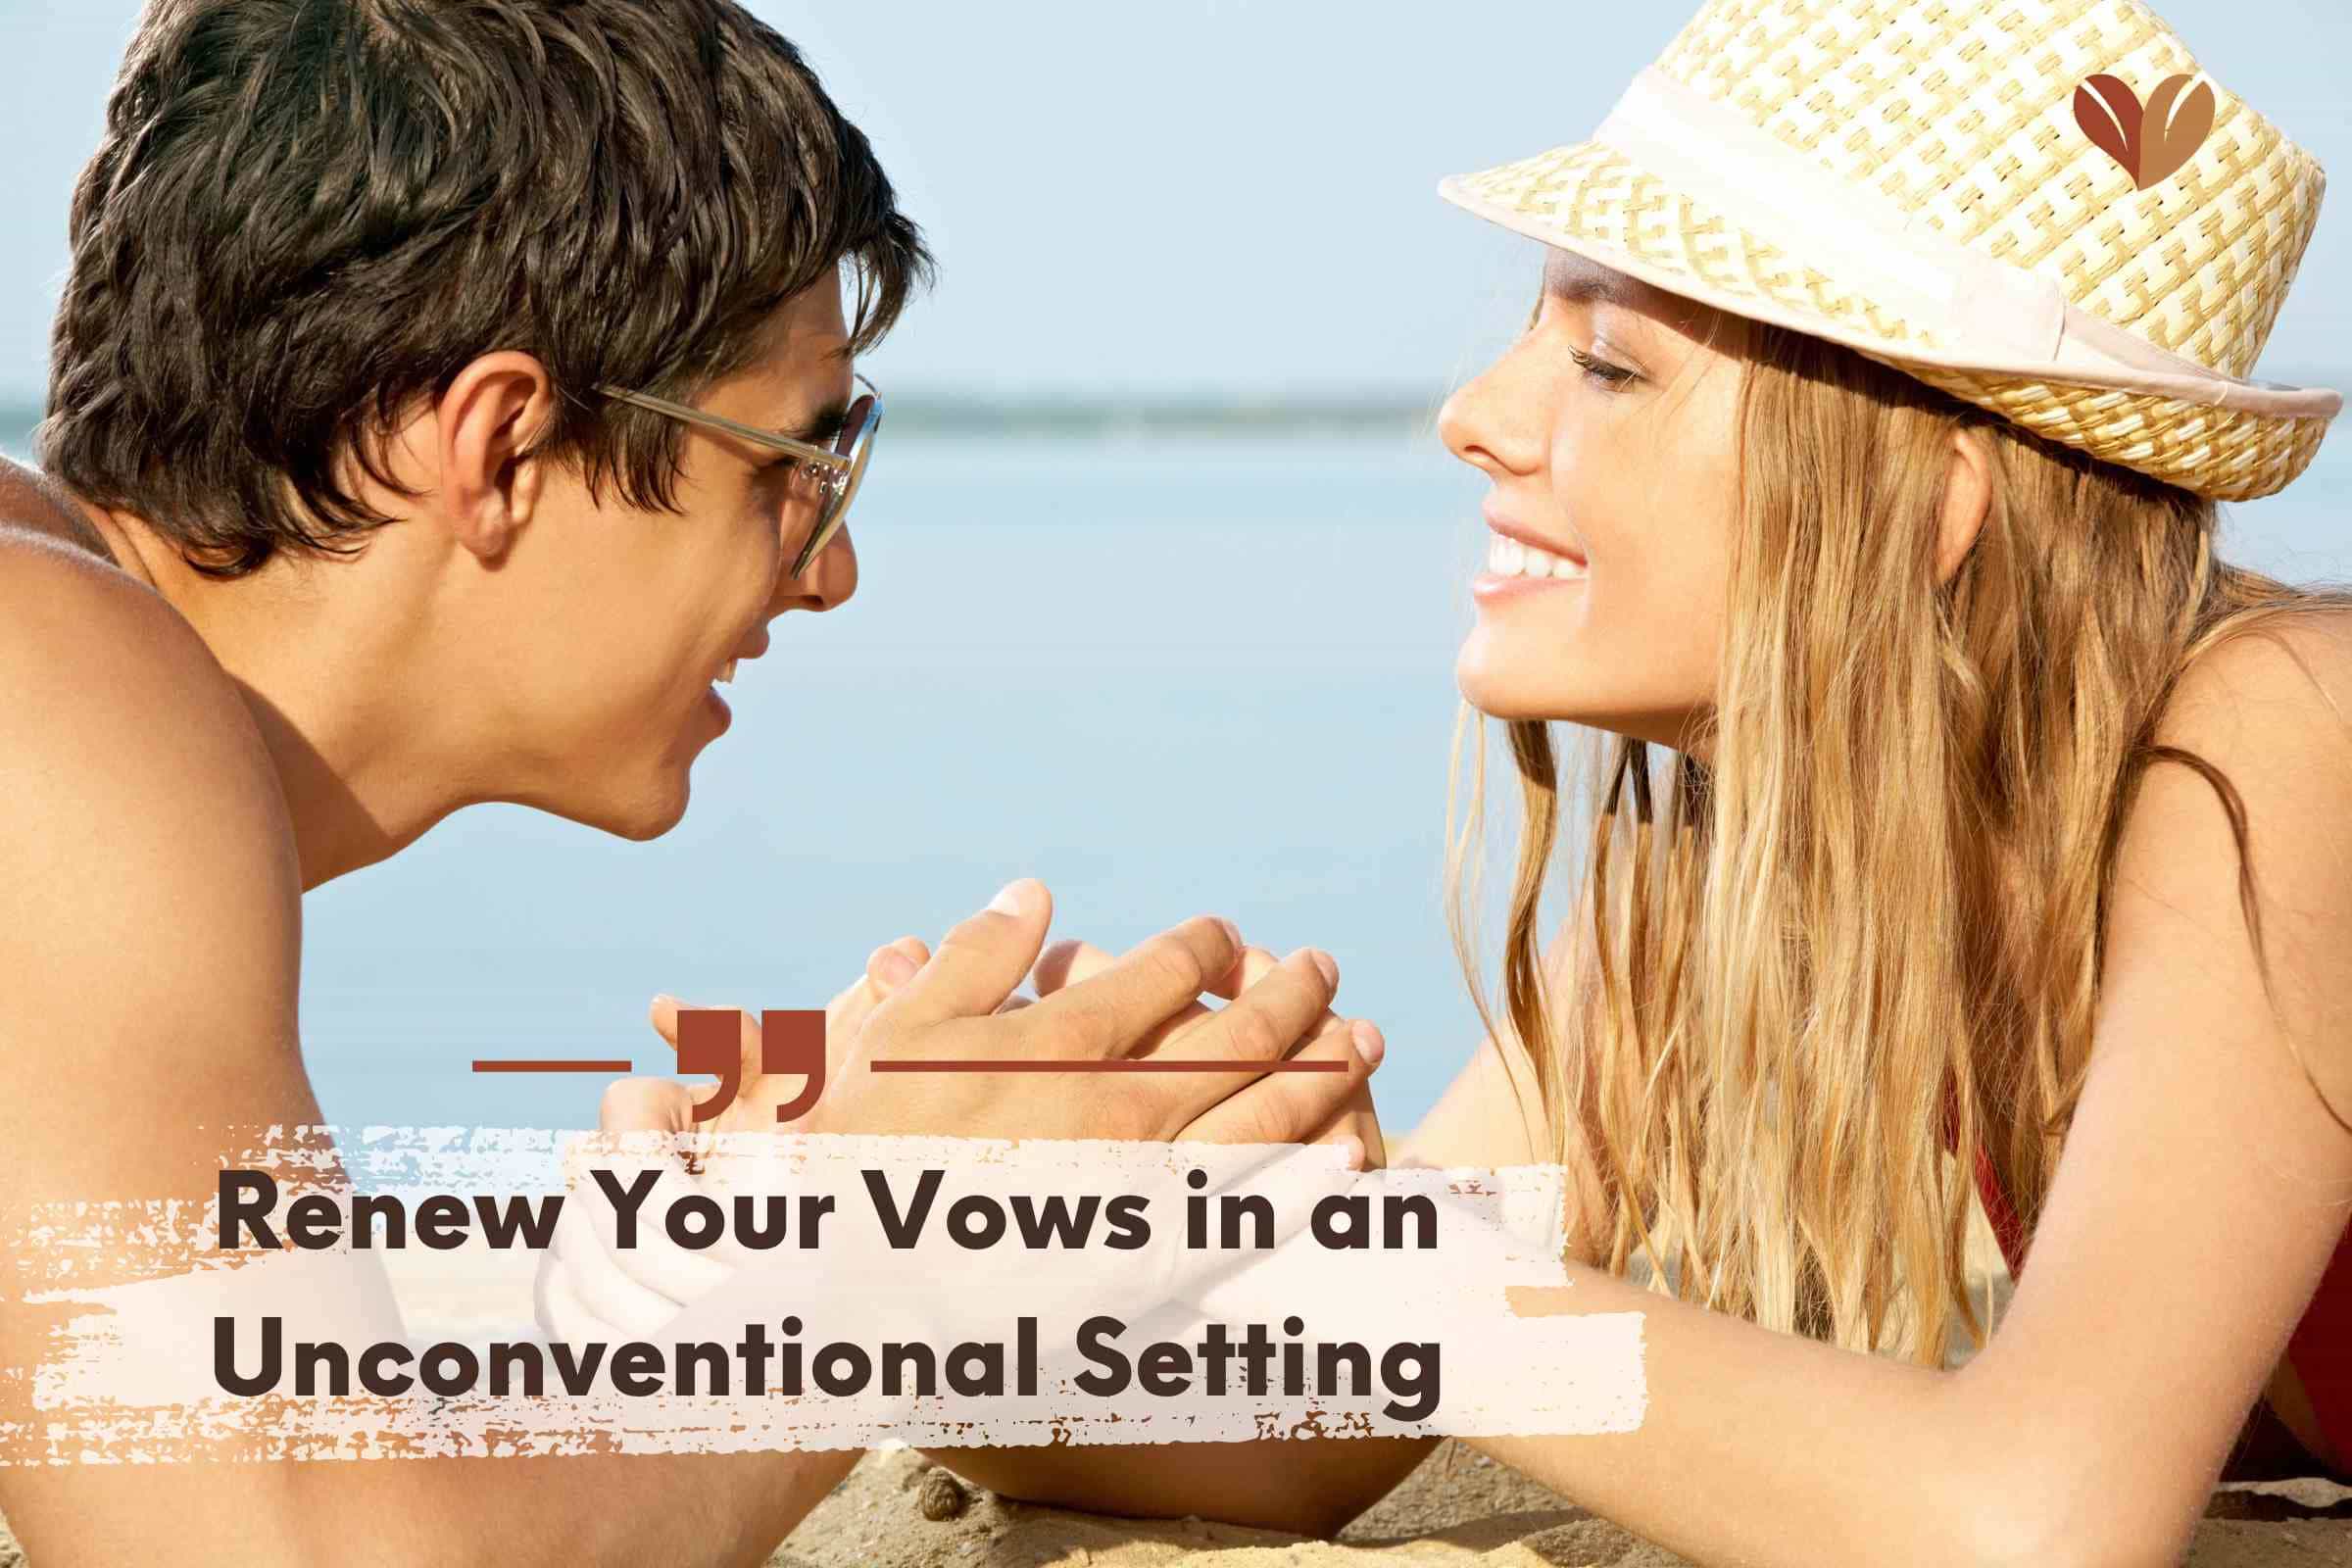 Renew Your Vows in an Unconventional Setting - 1 year anniversary ideas for girlfriend